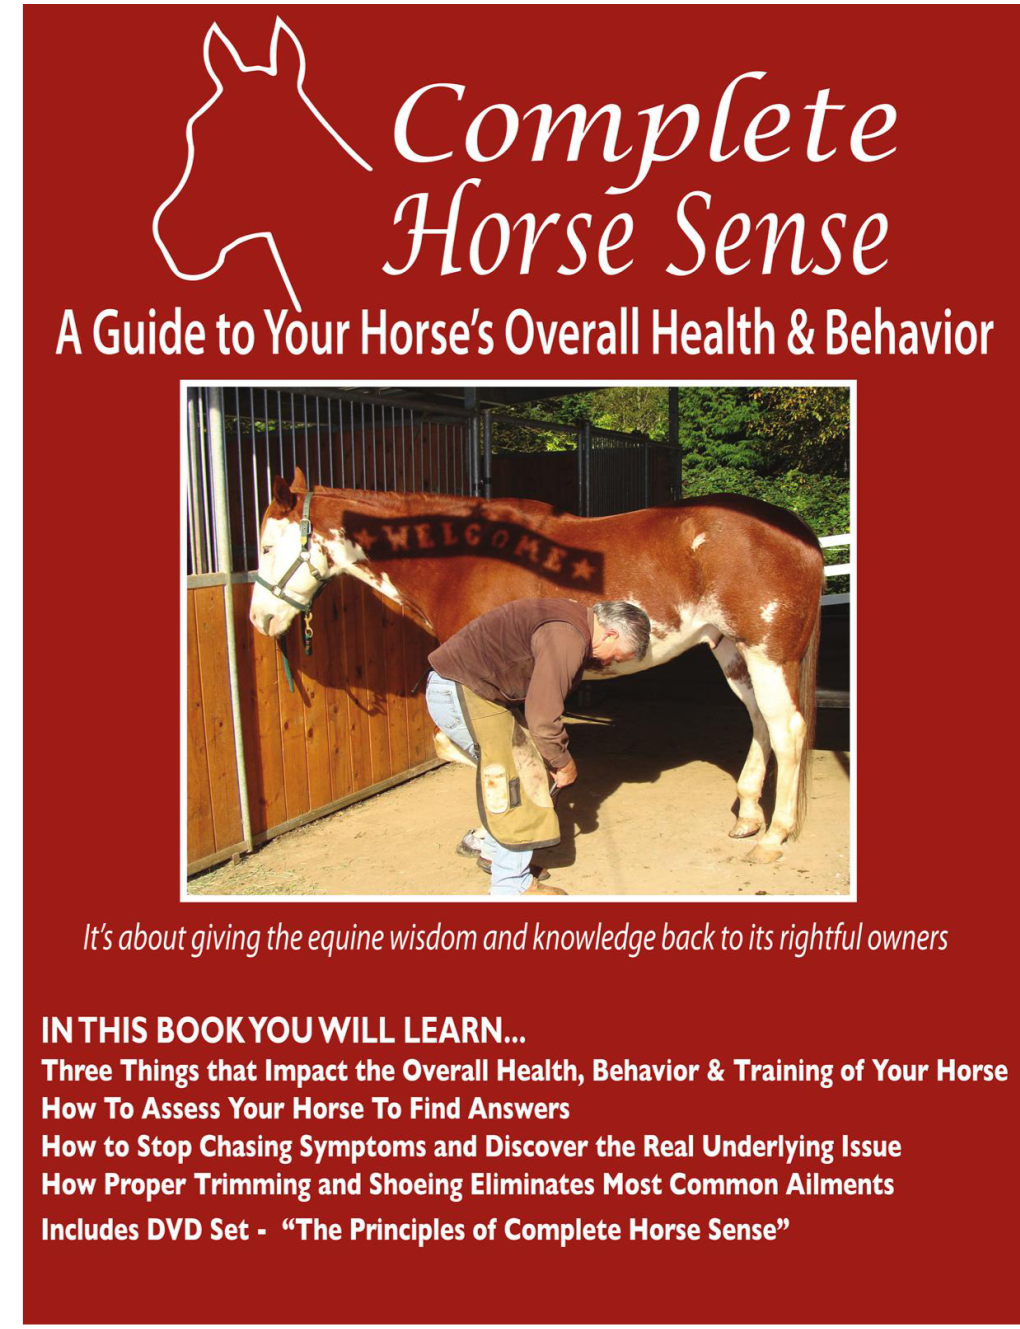 A Guide to Your Horse's Overall Health & Behavior